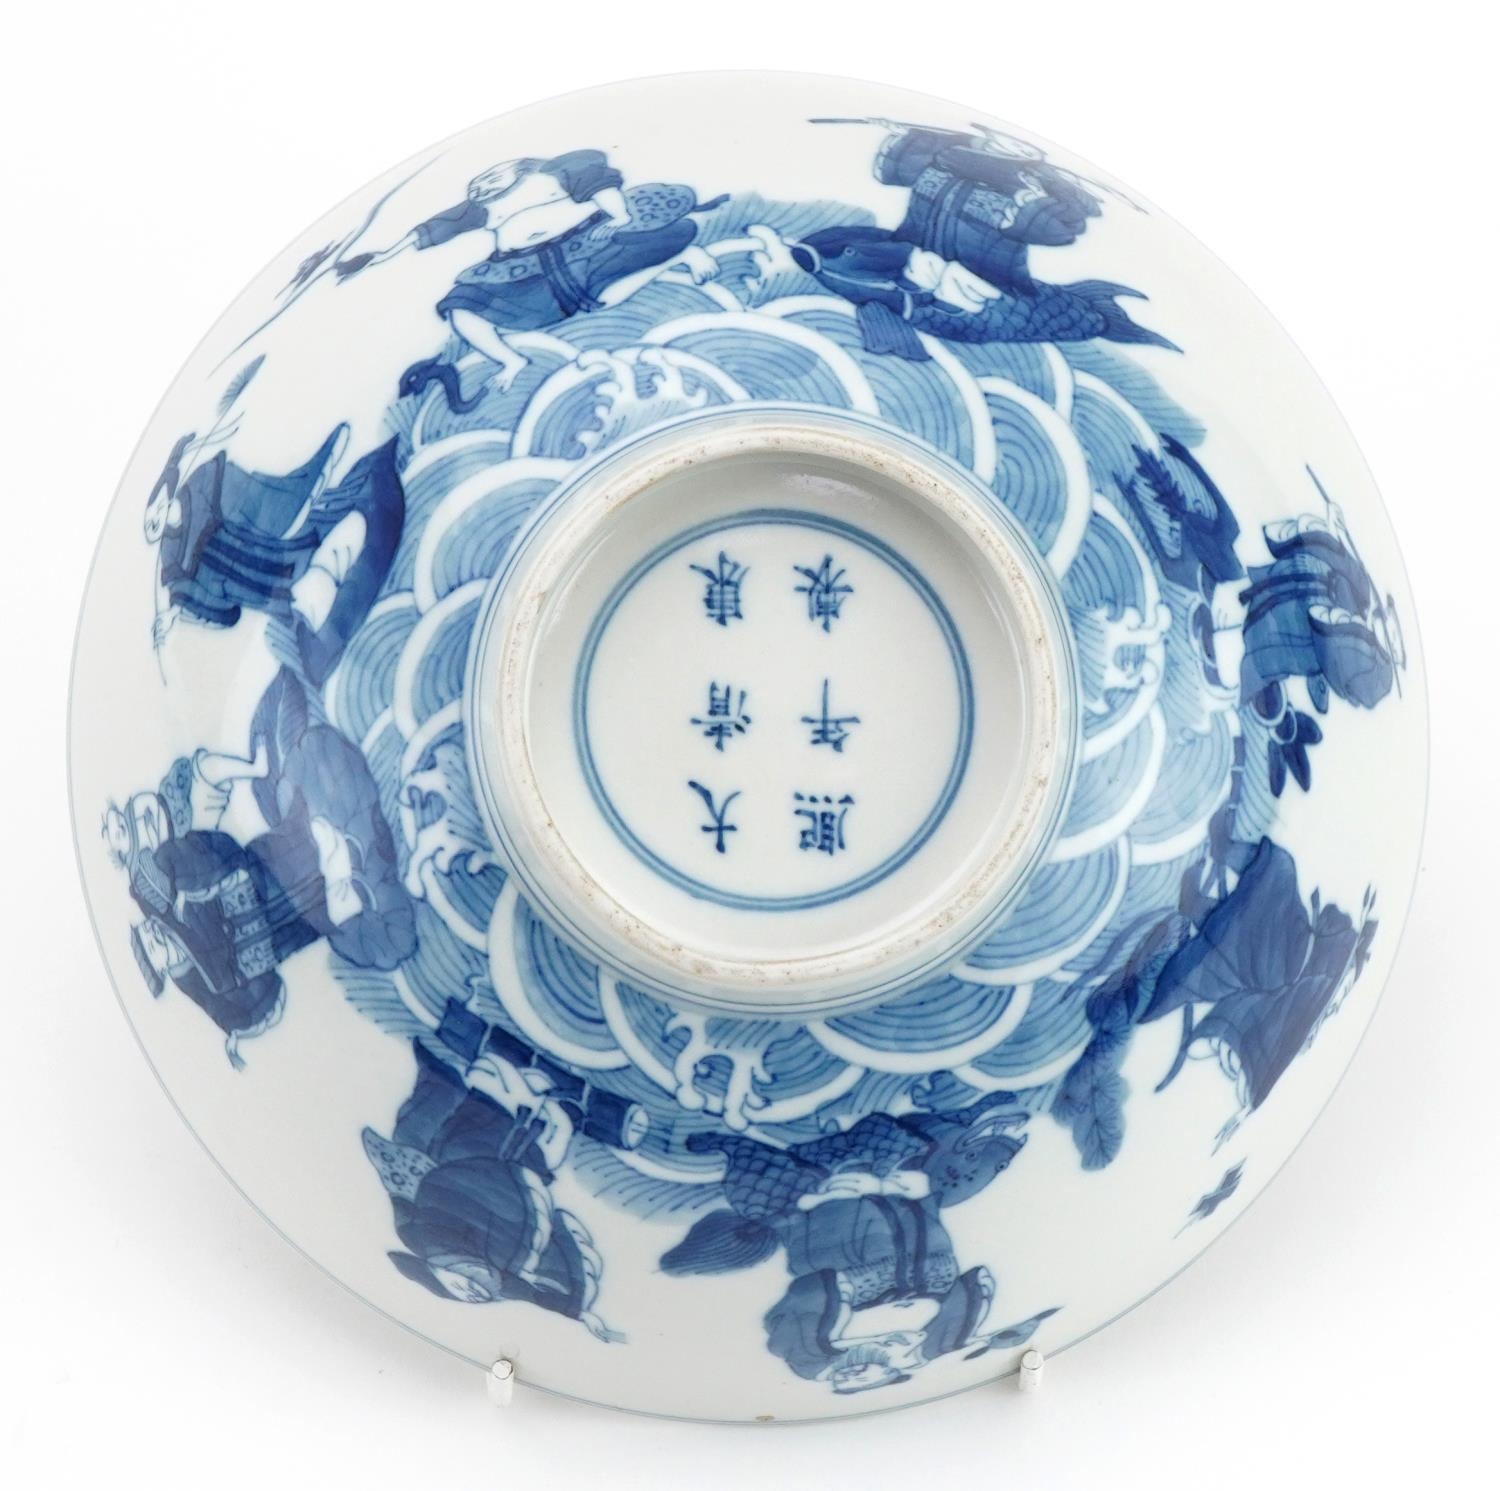 Chinese porcelain footed bowl hand painted with immortals above crashing waves, six figure character - Image 6 of 7